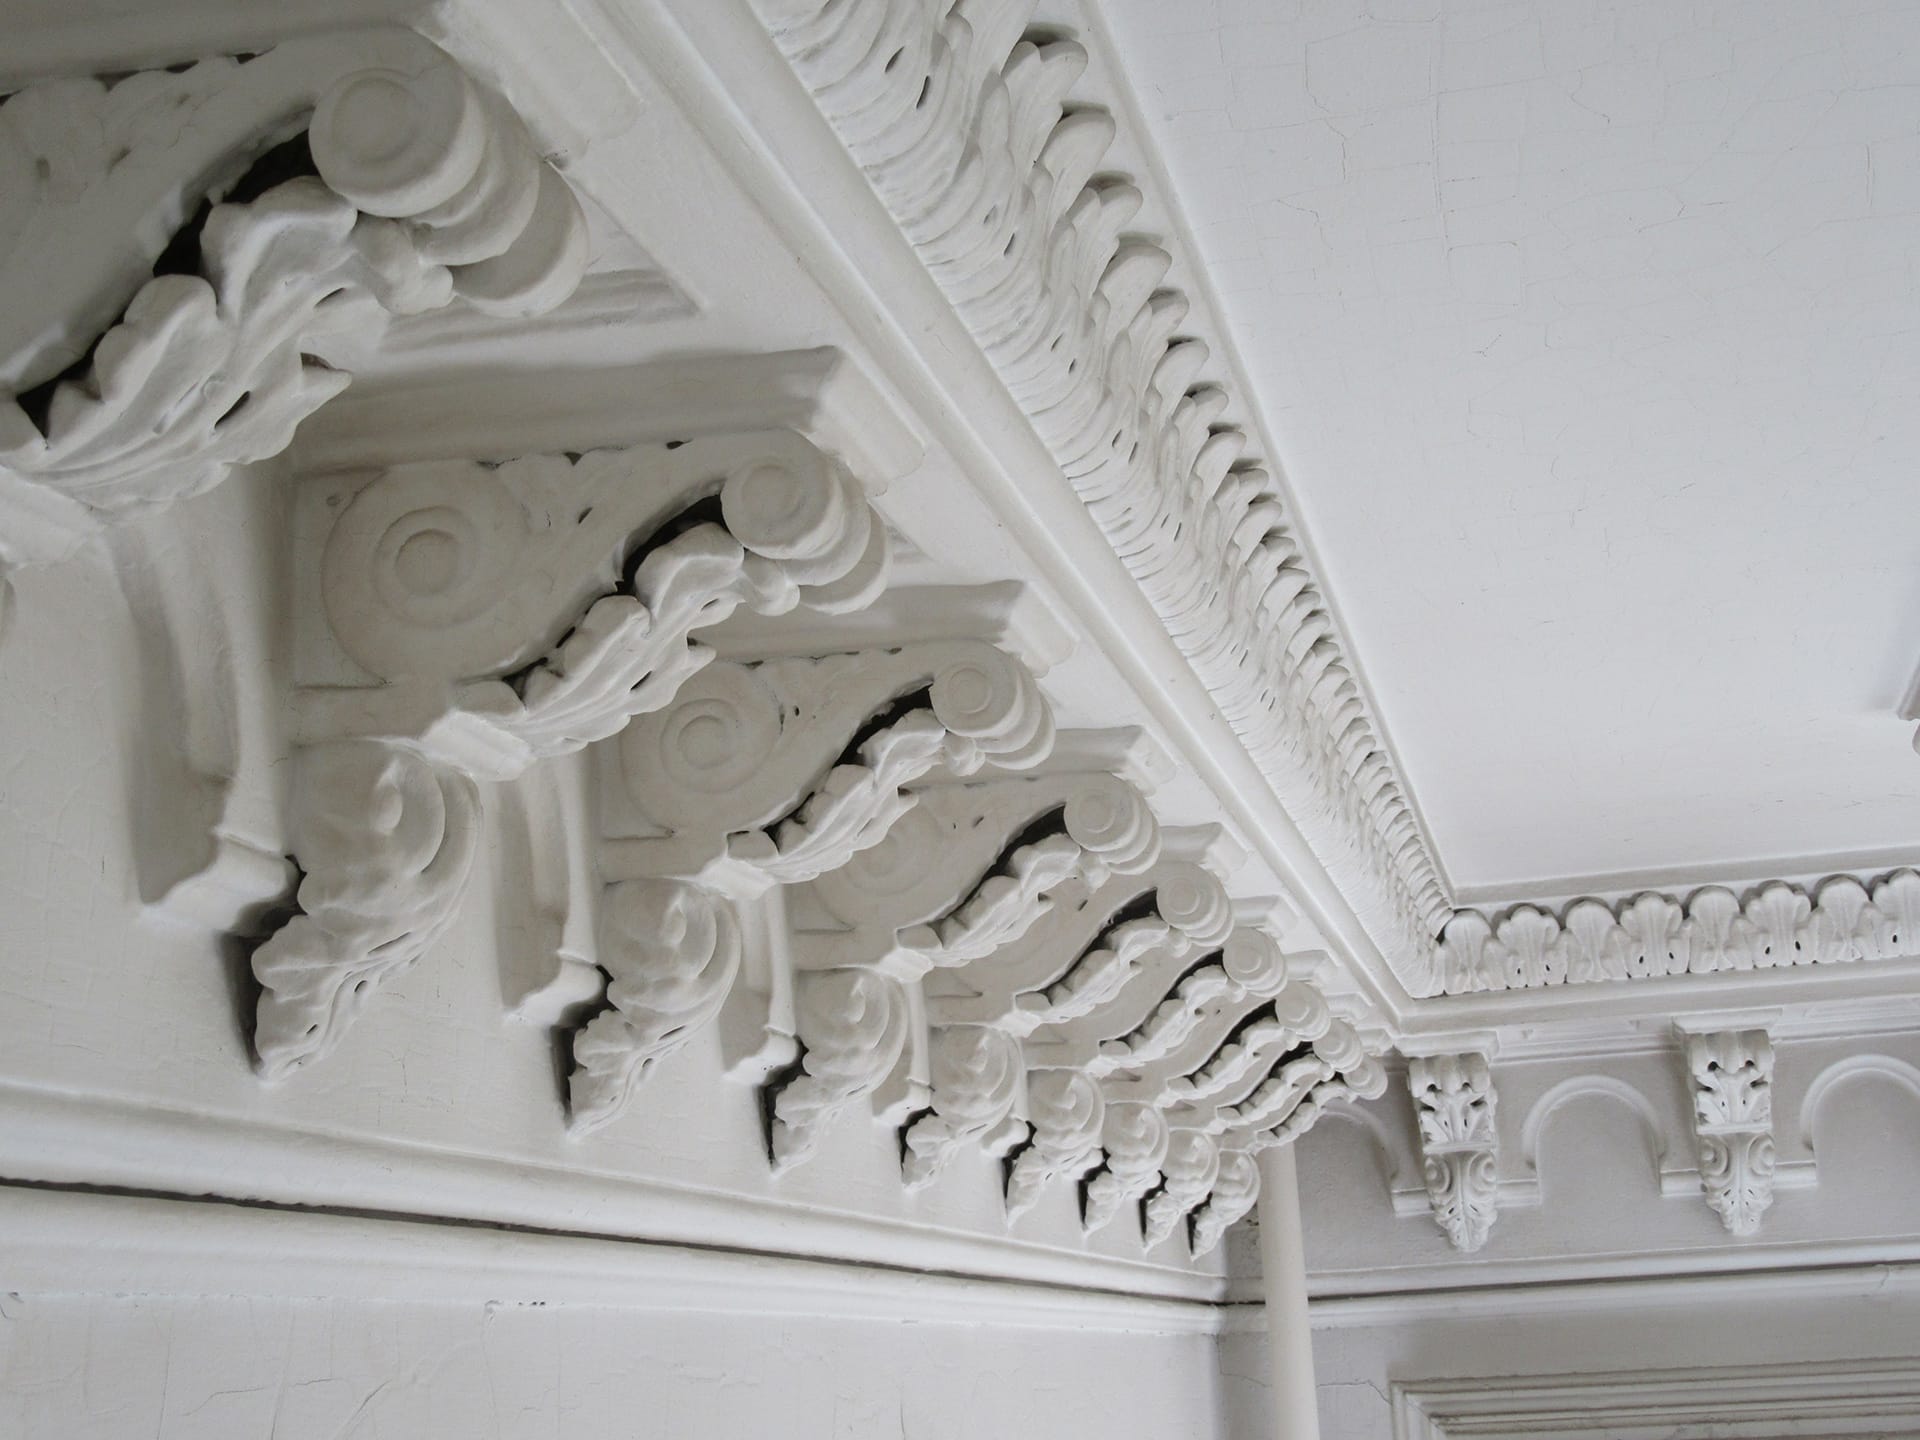 Plaster crown molding details in a Carroll Gardens home.